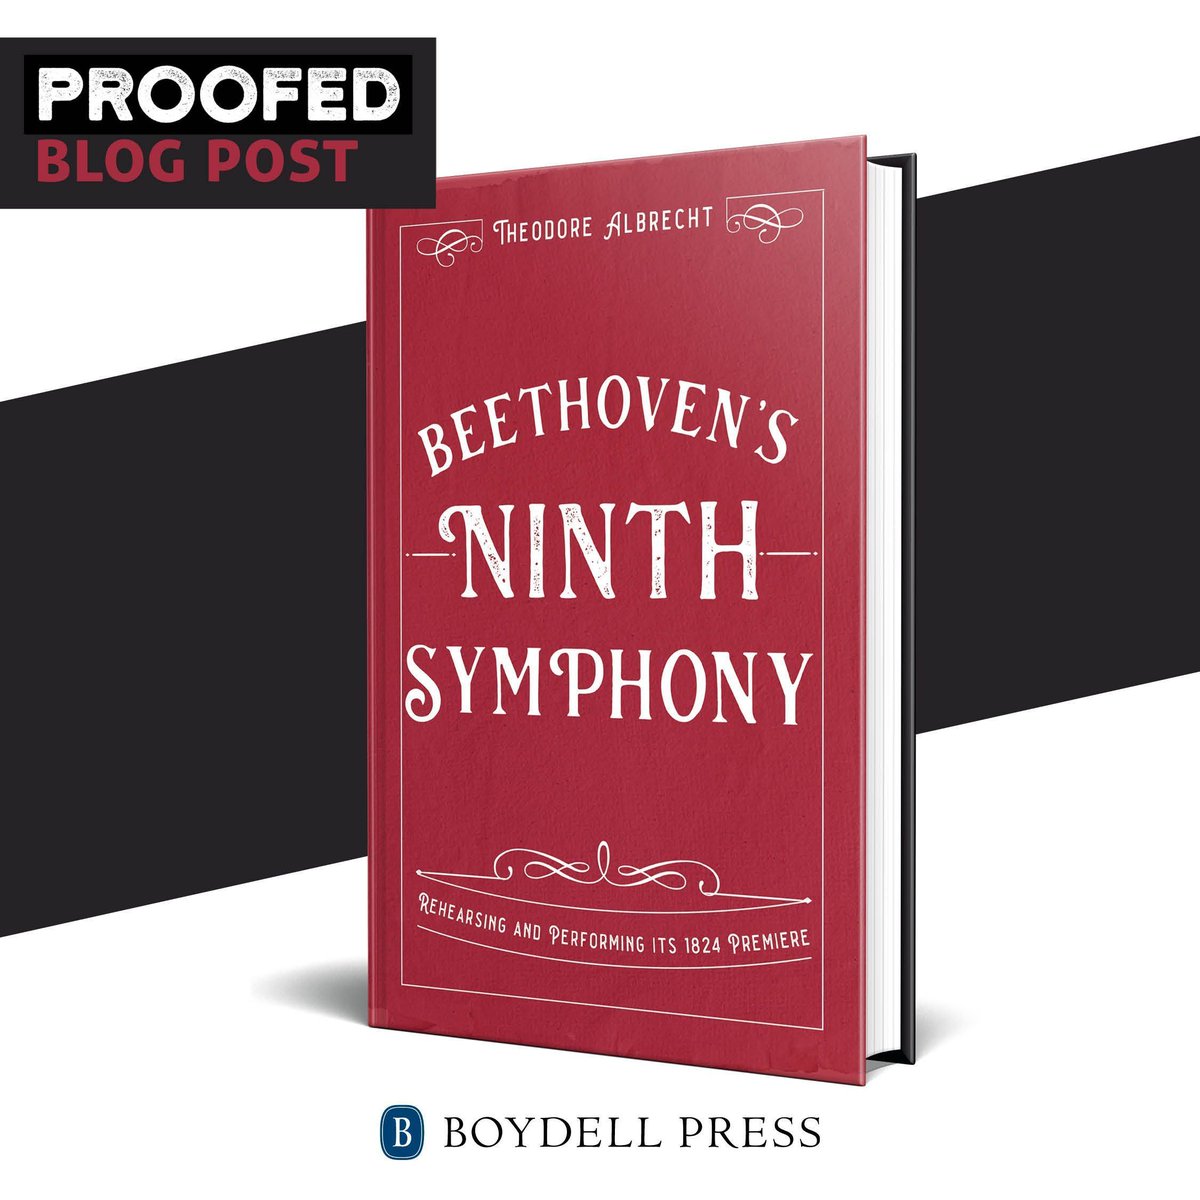 New blog post incoming!📣Author of 'Beethoven's Ninth Symphony' Theodore Albrecht, takes us through his journey with #Beethoven in this interview: buff.ly/4bqHEki 

#ProofedBlog #MusicStudies #BeethovenNinthSymphony